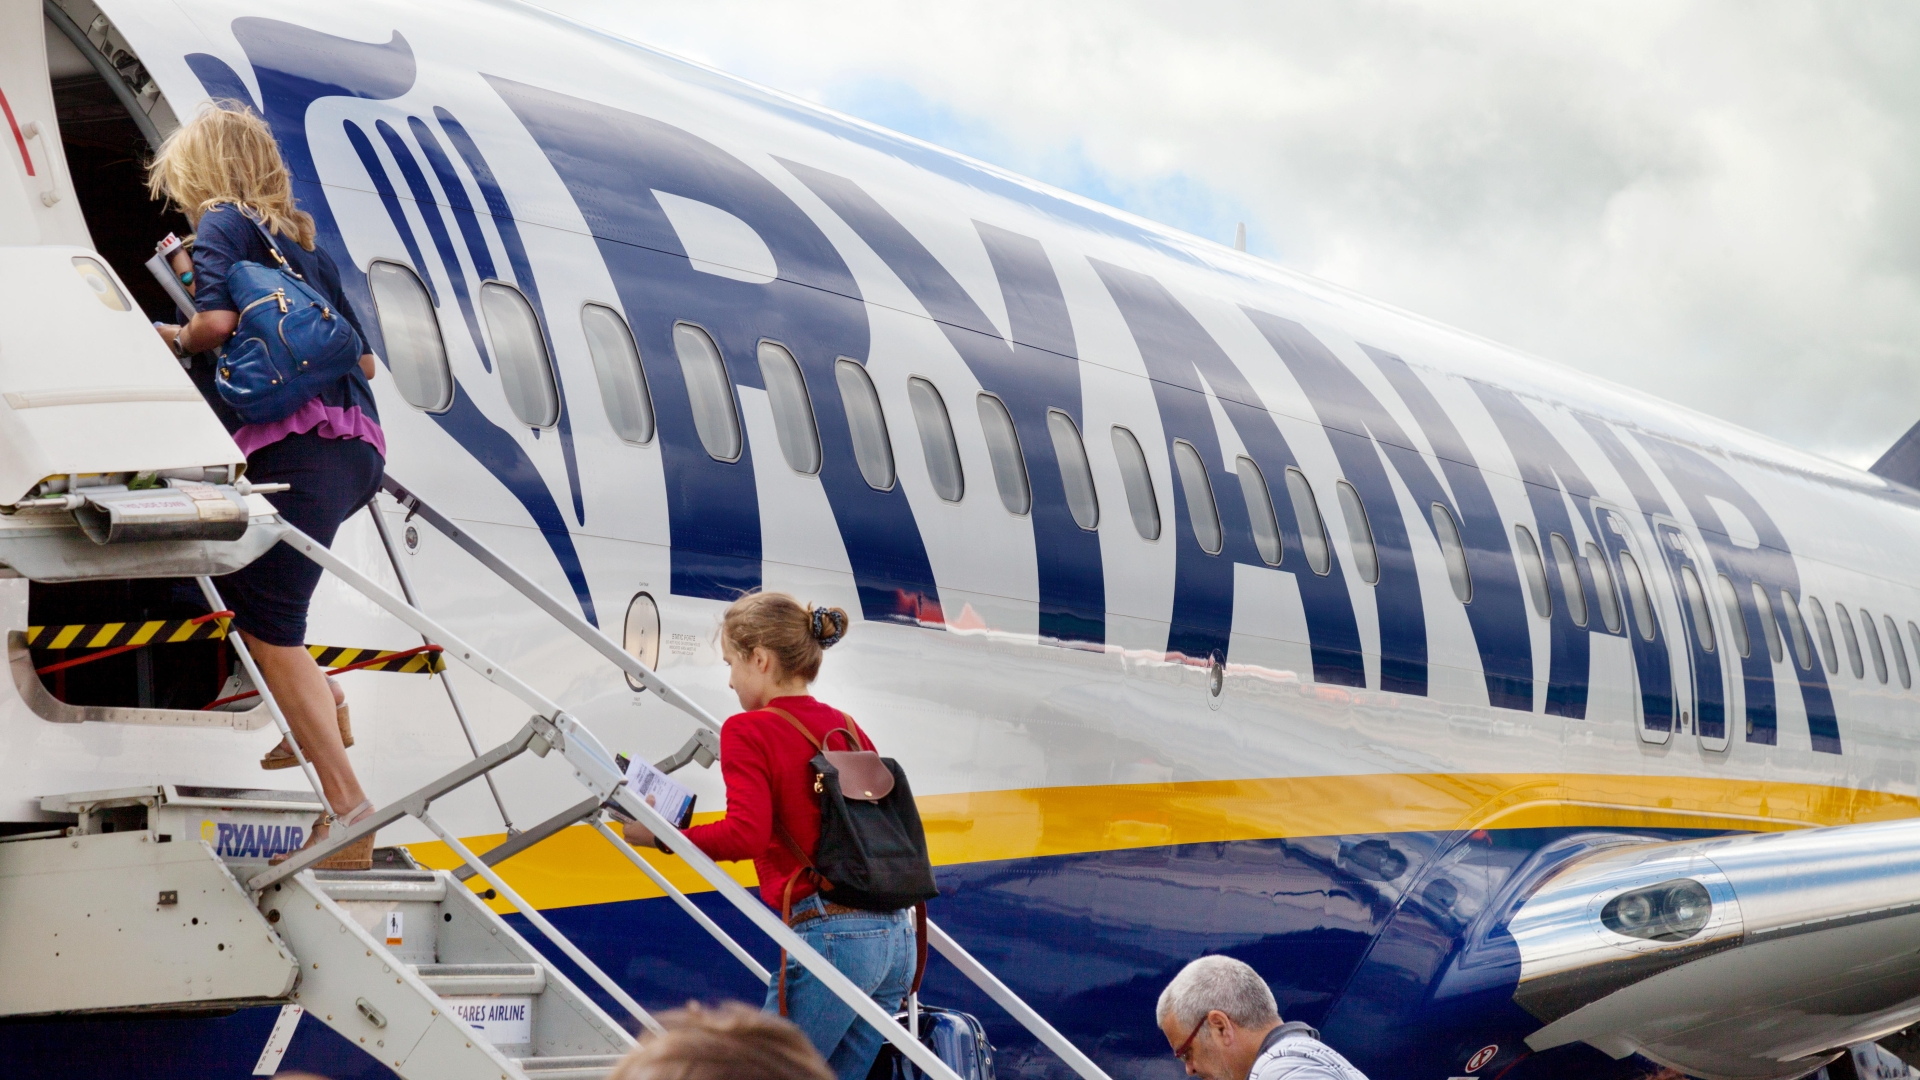 Ryanair passenger charged £38 to bring pastry on Majorca flight – sparking fury